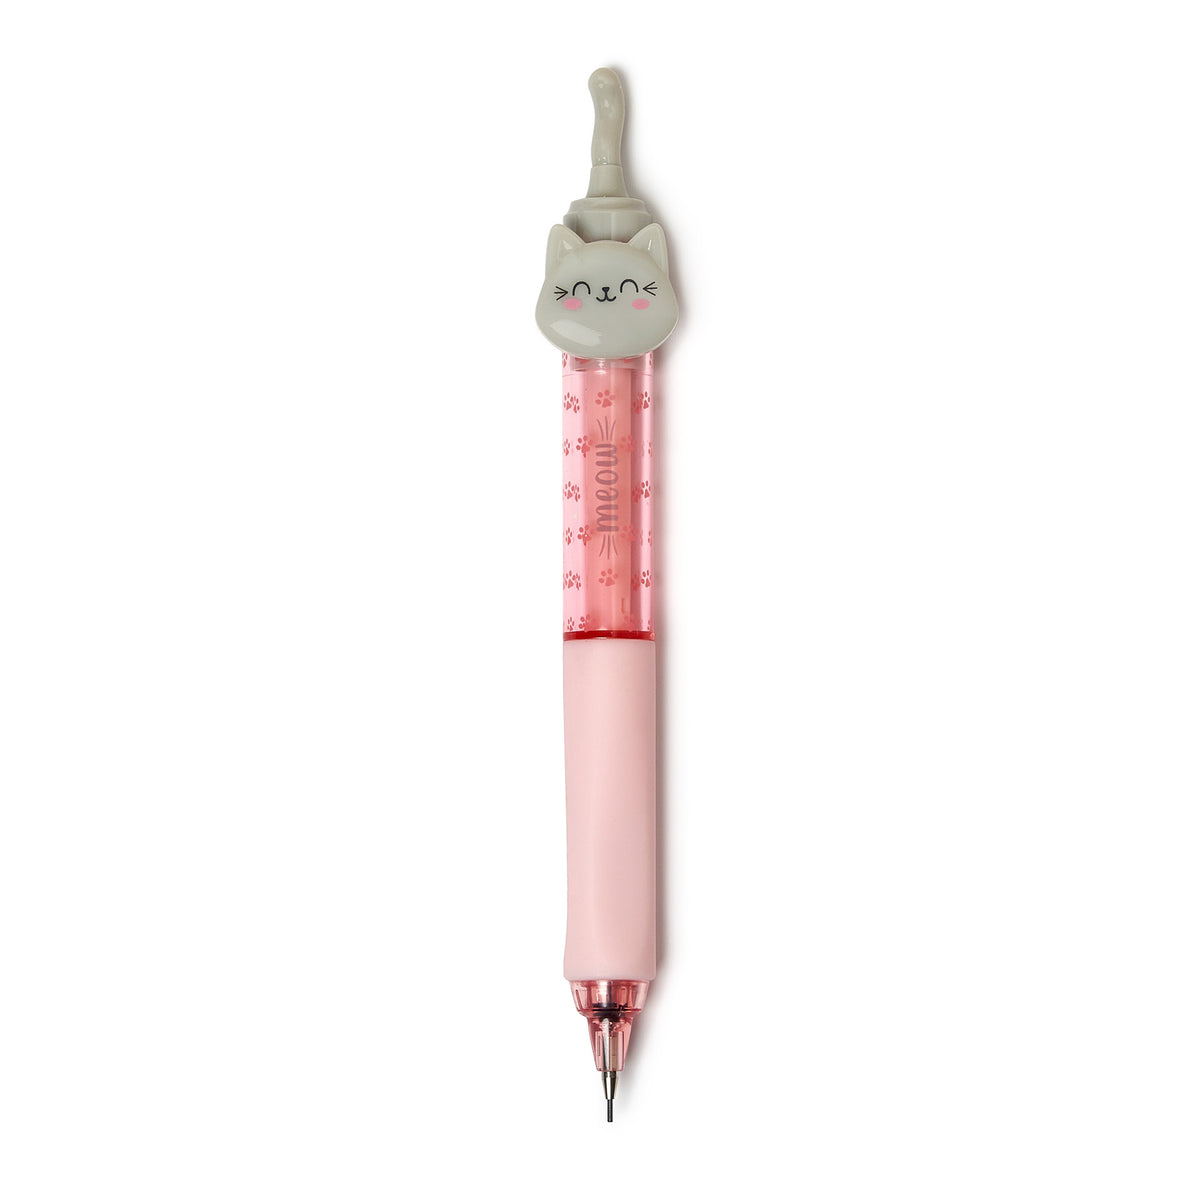 An image of a mechanical pencil with a light pink shaft. It has a clear section showing the lead and a silicone part for comfort. It also has a light grey cat with it&#39;s tail sticking up at the top.